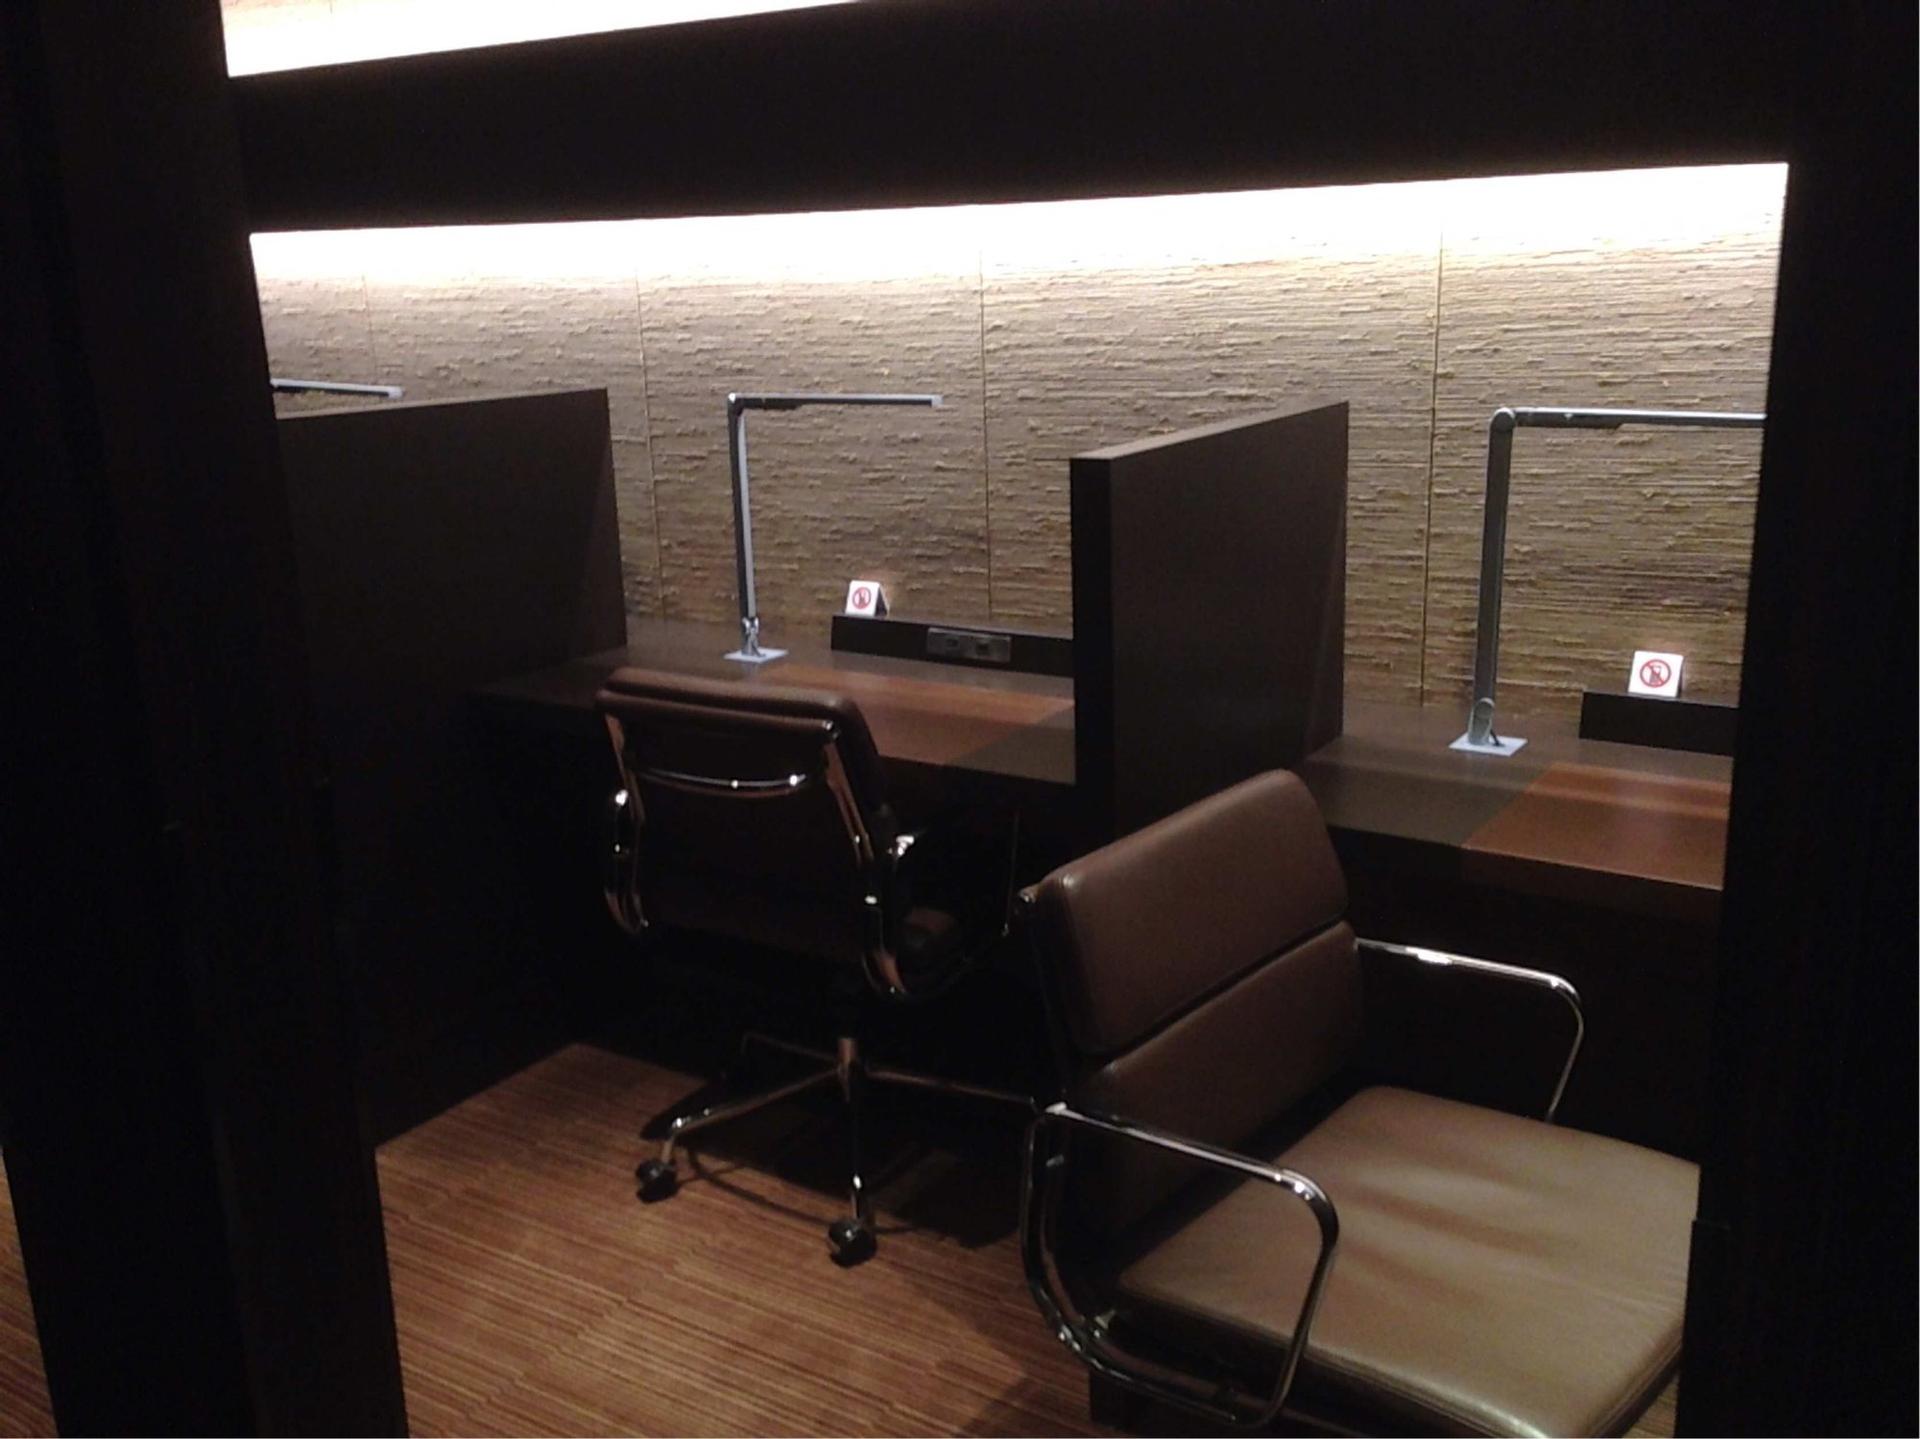 Japan Airlines JAL First Class Lounge image 14 of 50